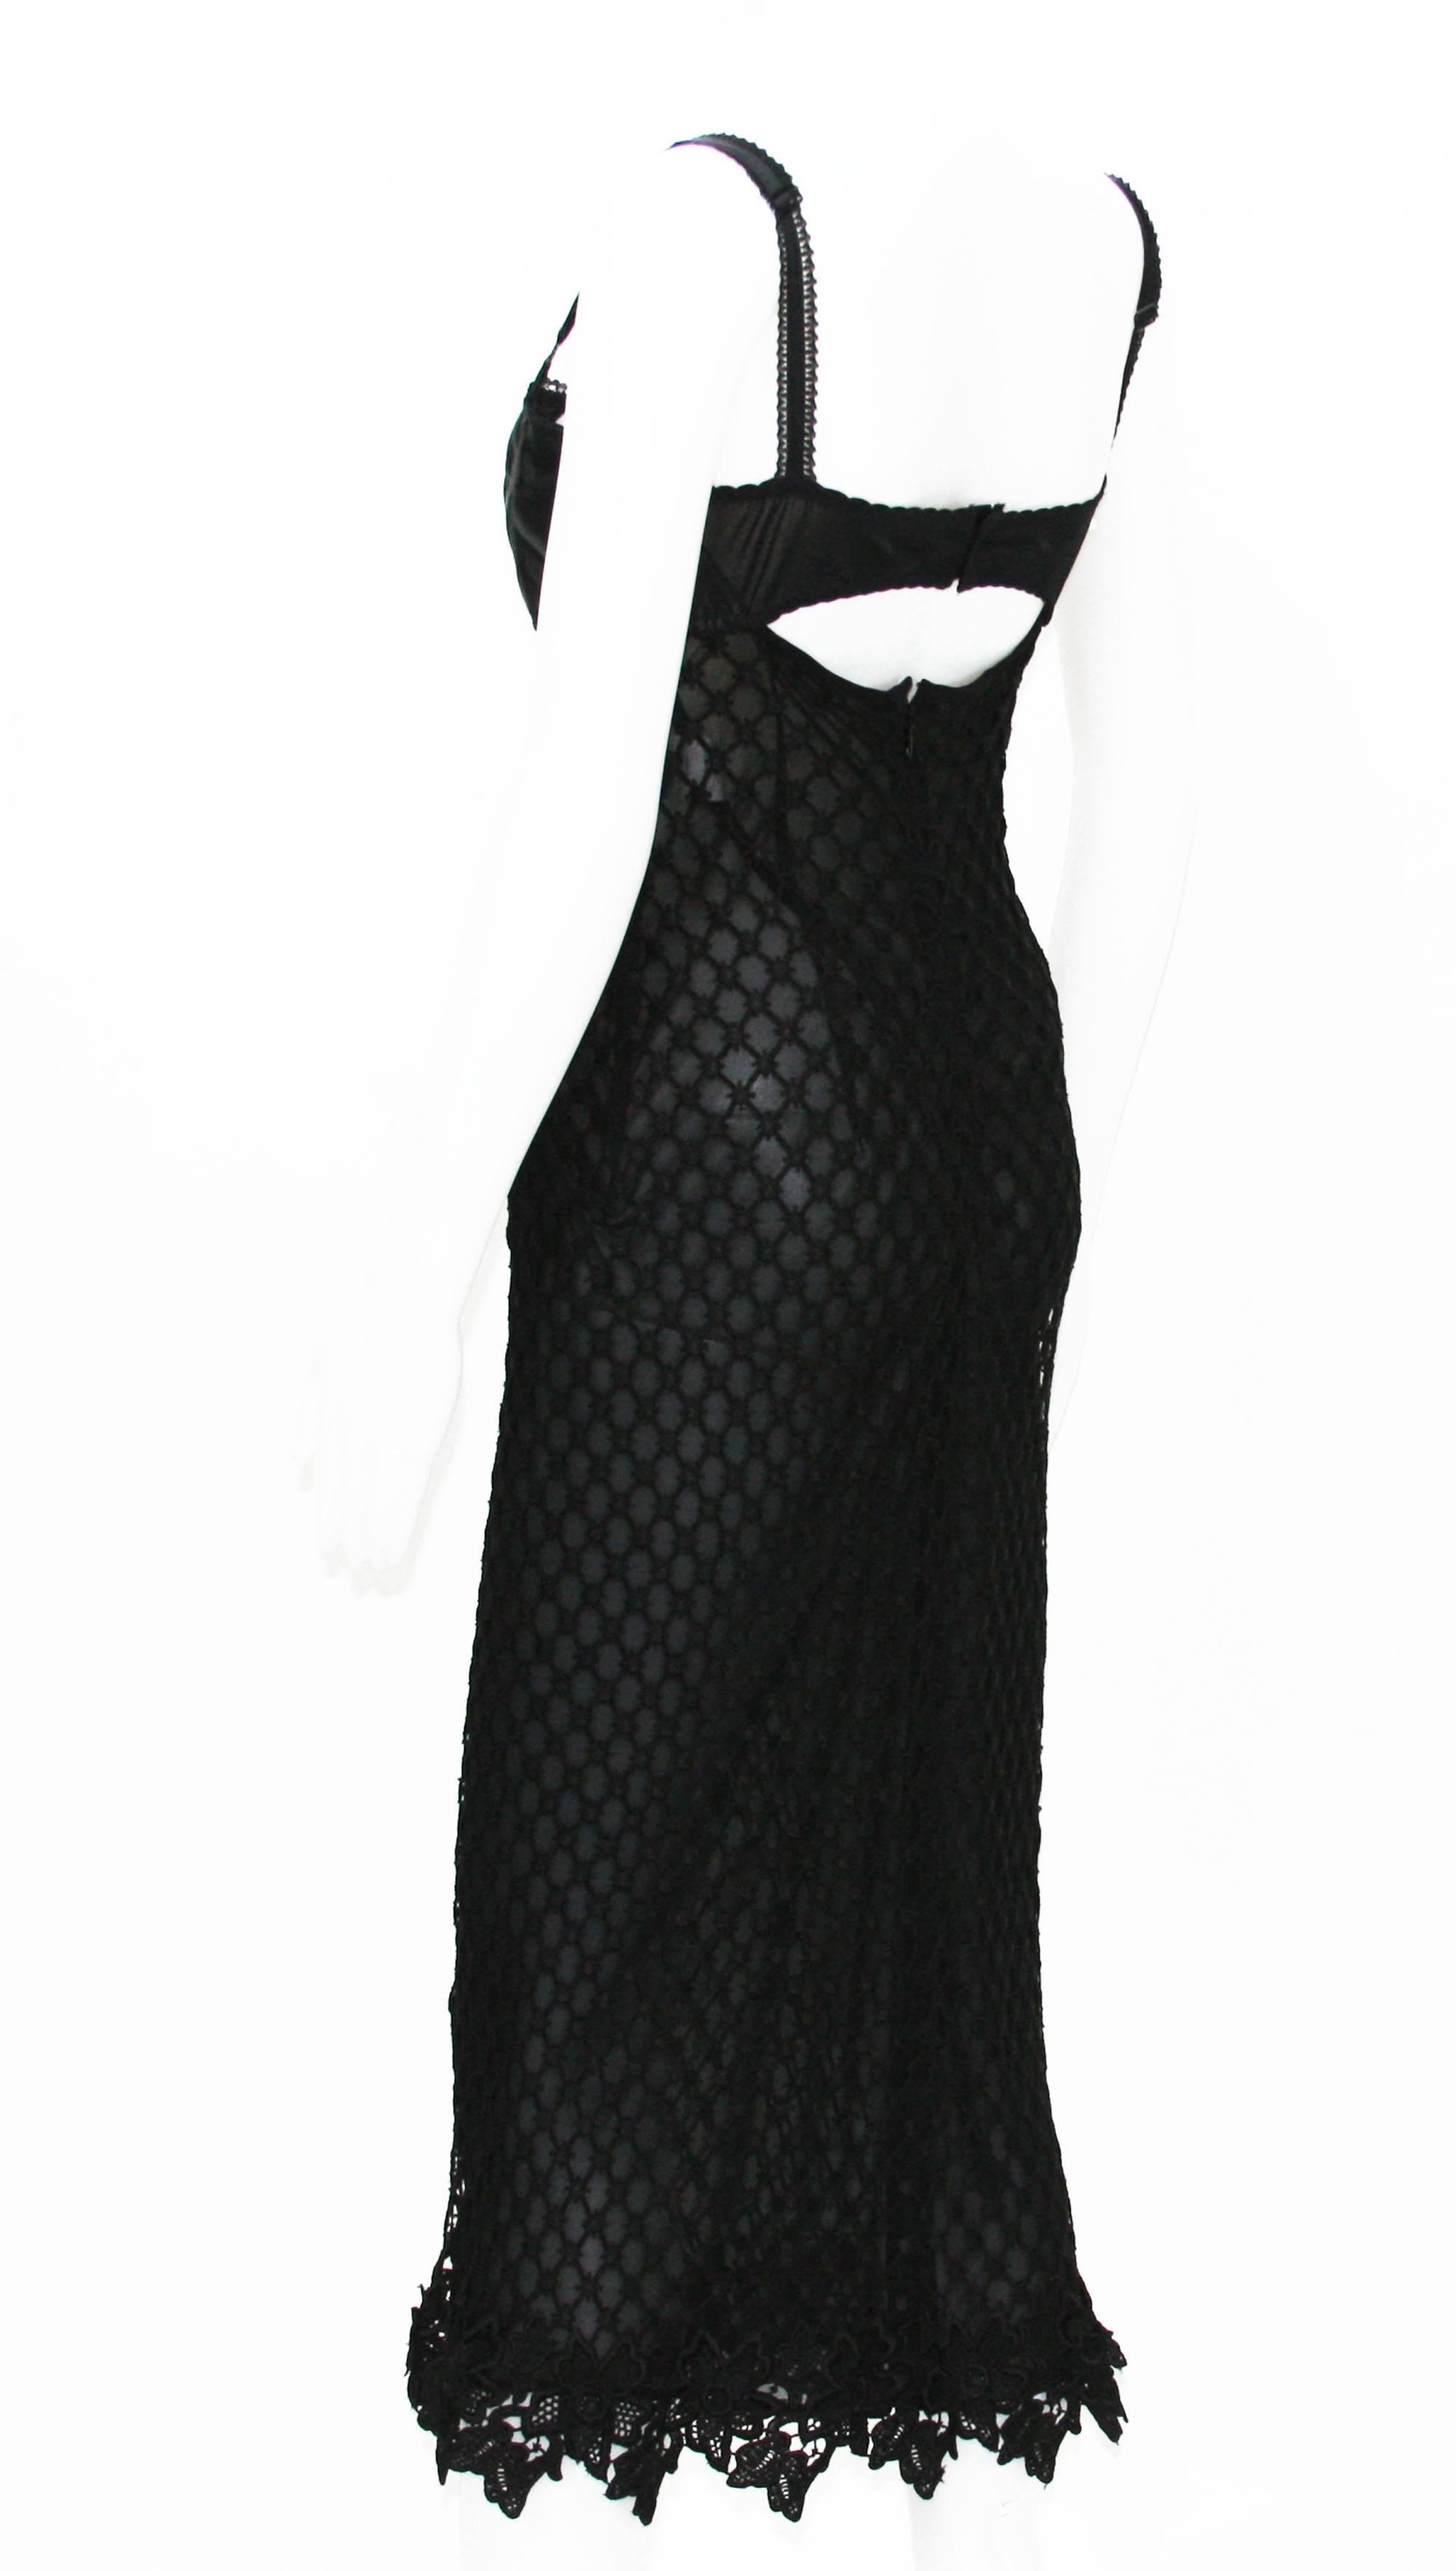 DOLCE & GABBANA Super Sexy Bustier Lace Dress
Italian Size - 44
Black Knitted Stretch Lace, Black Sheer Lining
Measurements for the dress approx. : bust - 37